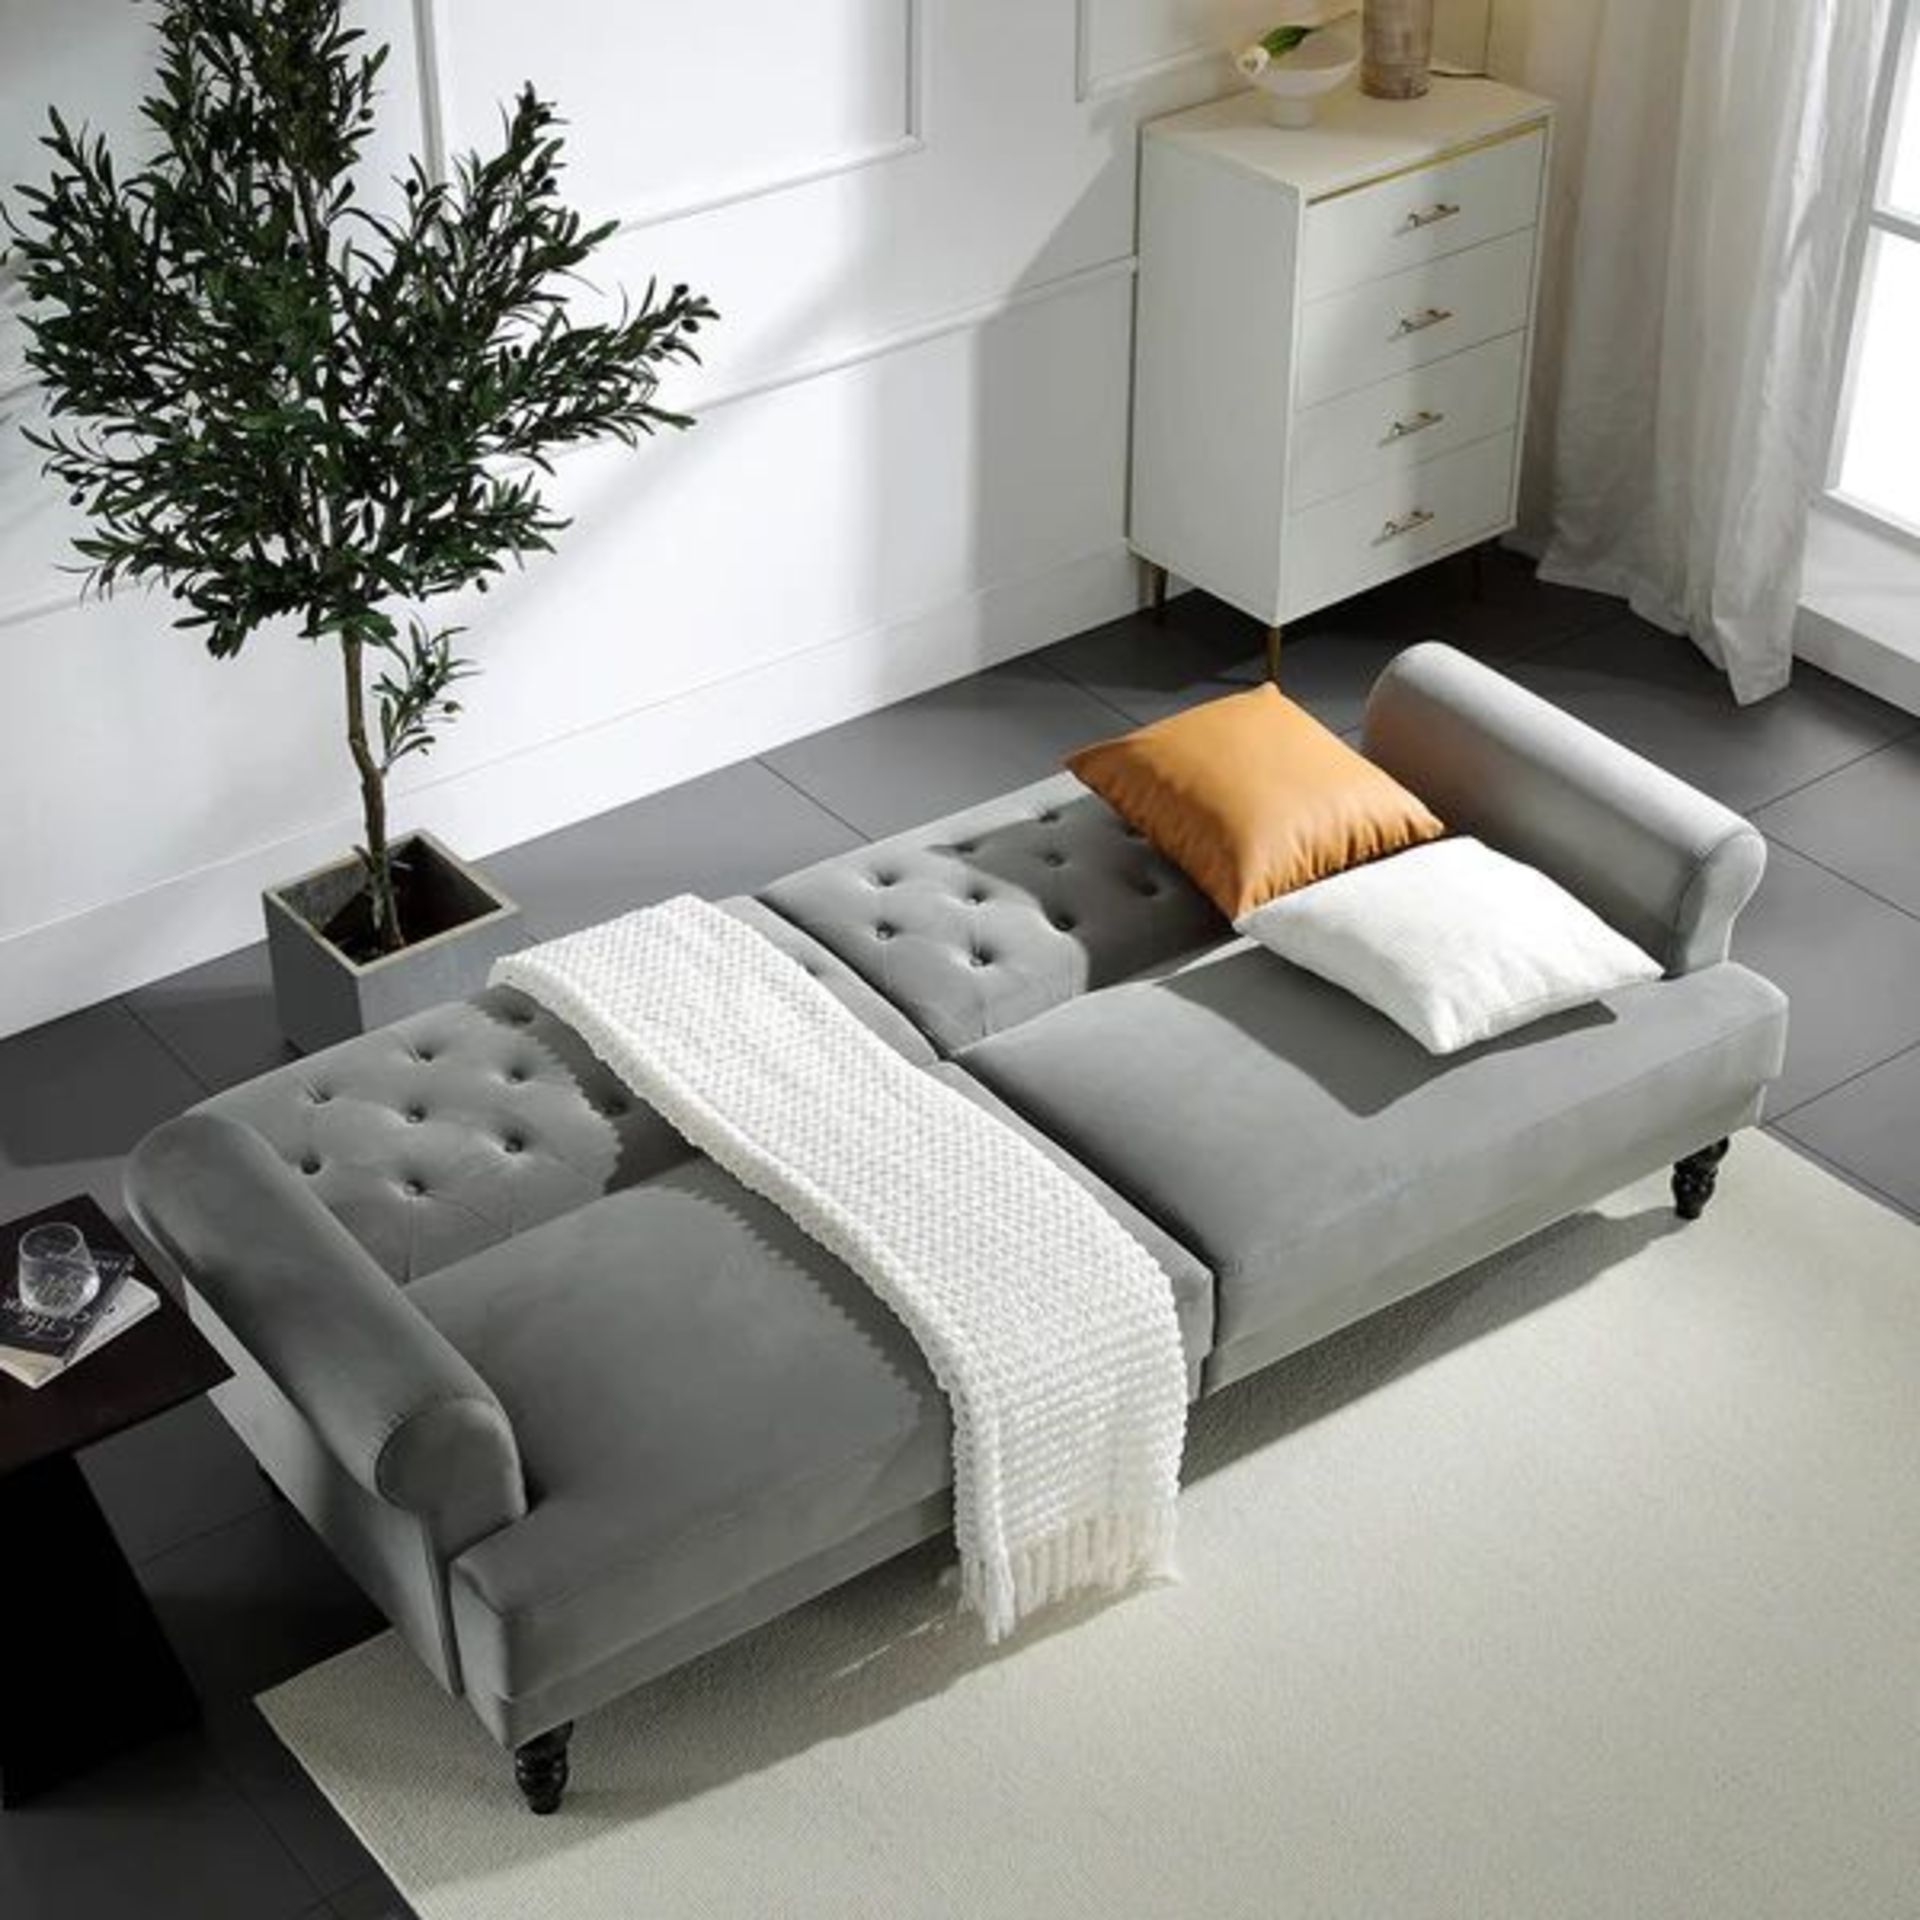 Hanney 3-Seater Chesterfield Sofabed in Grey Velvet. - R14. RRP £569.99. Serpentine springs - Image 2 of 2